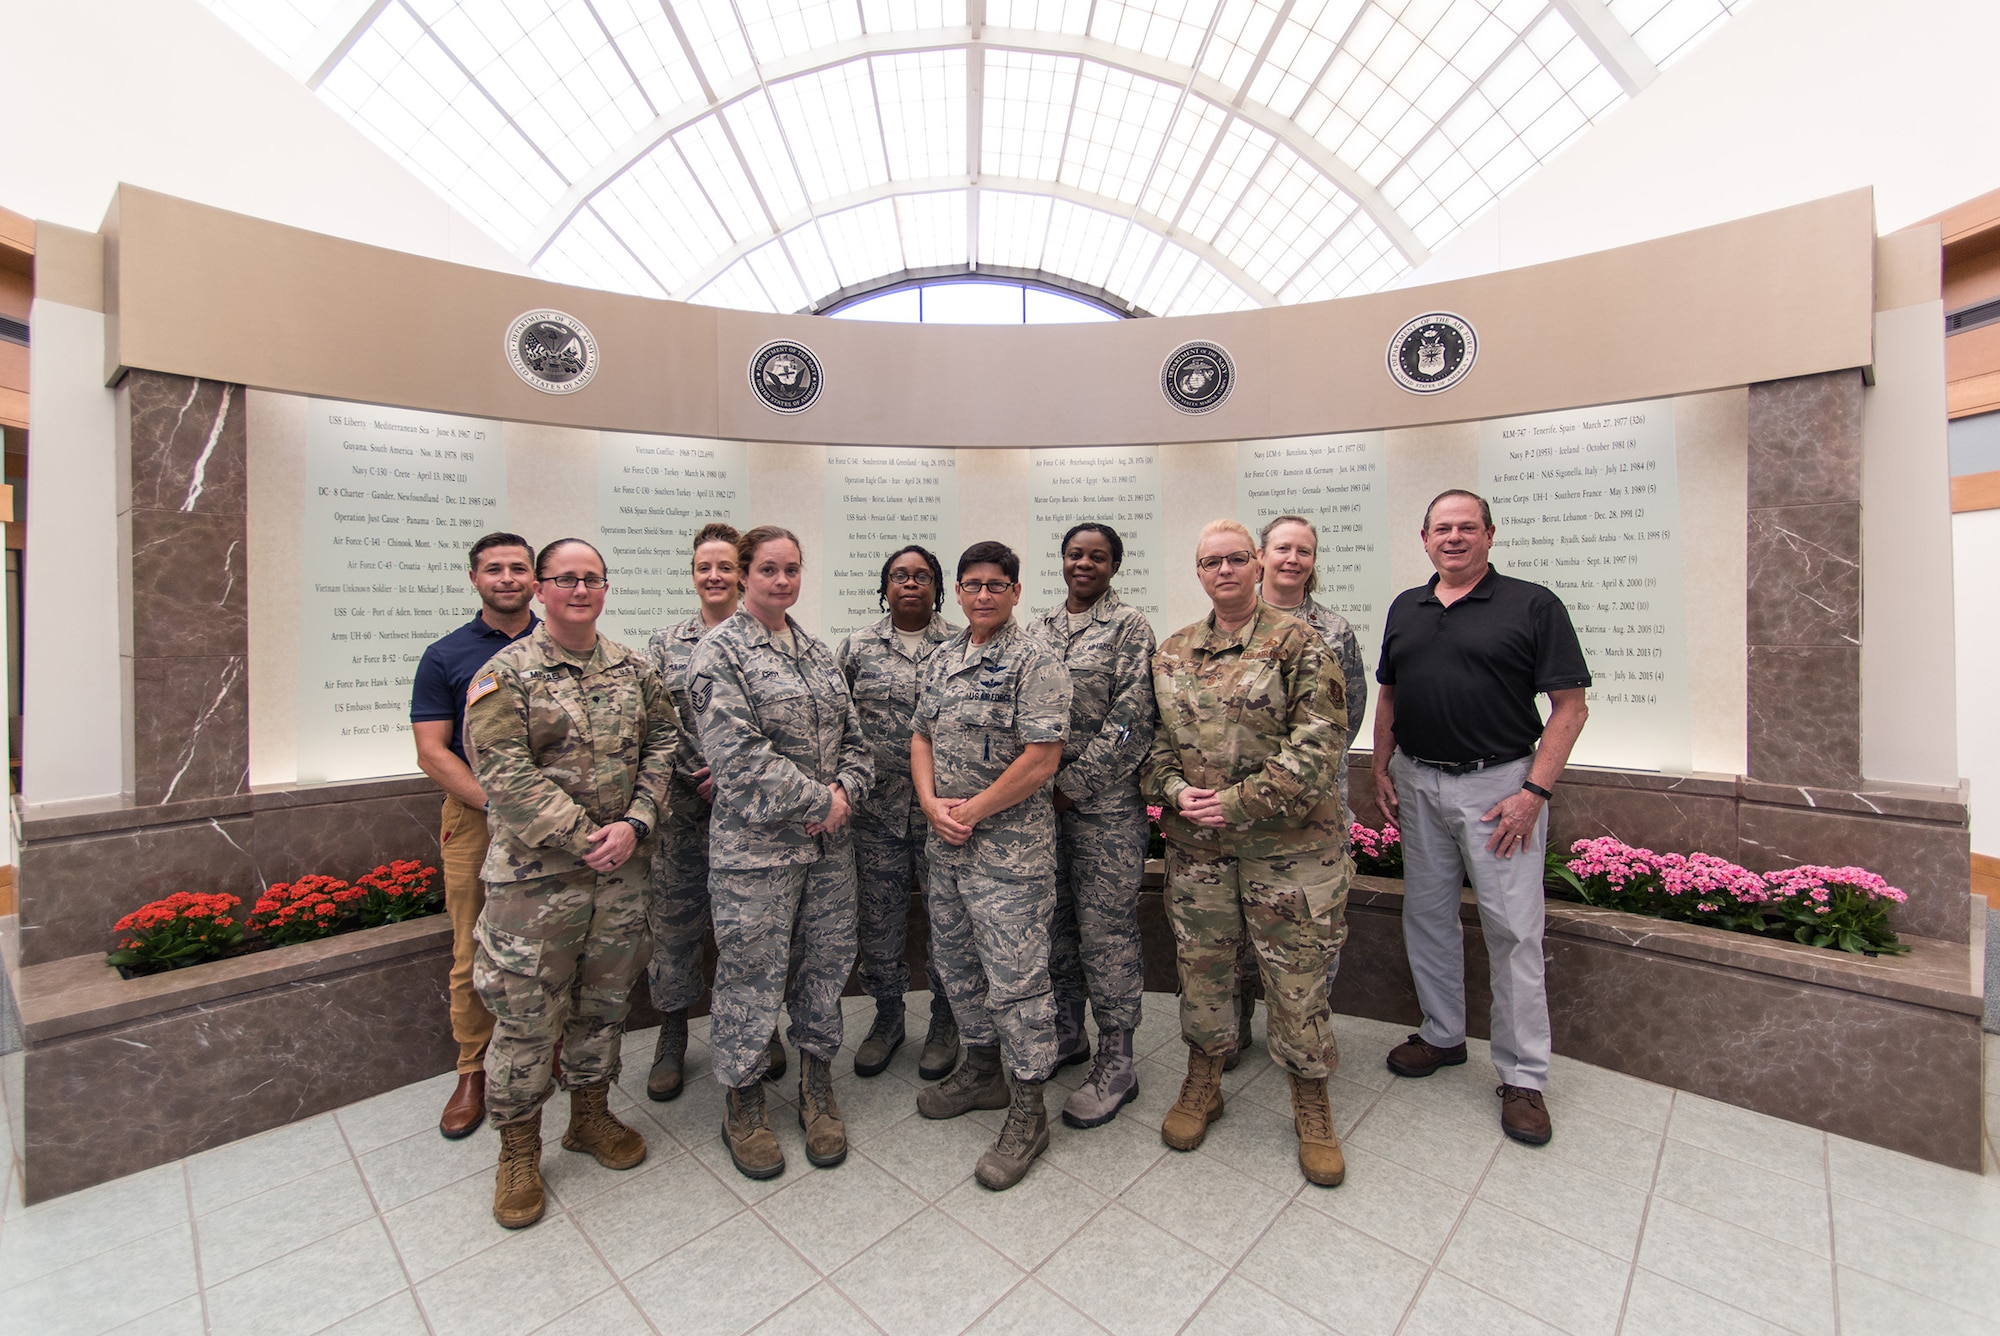 Members of the Delaware Air National Guard 166th Airlift Wing and Delaware Army National Guard pose in front of the memorial wall in the lobby of the Dover Air Force Base Mortuary Affairs Operations Center June 27, 2019. Delaware National Guard members were invited to tour Air Force Mortuary Affairs Operations and Air Forces Medical Examiner System laboratories. (U.S. Air National Guard photo by Staff Sgt. Katherine Miller)